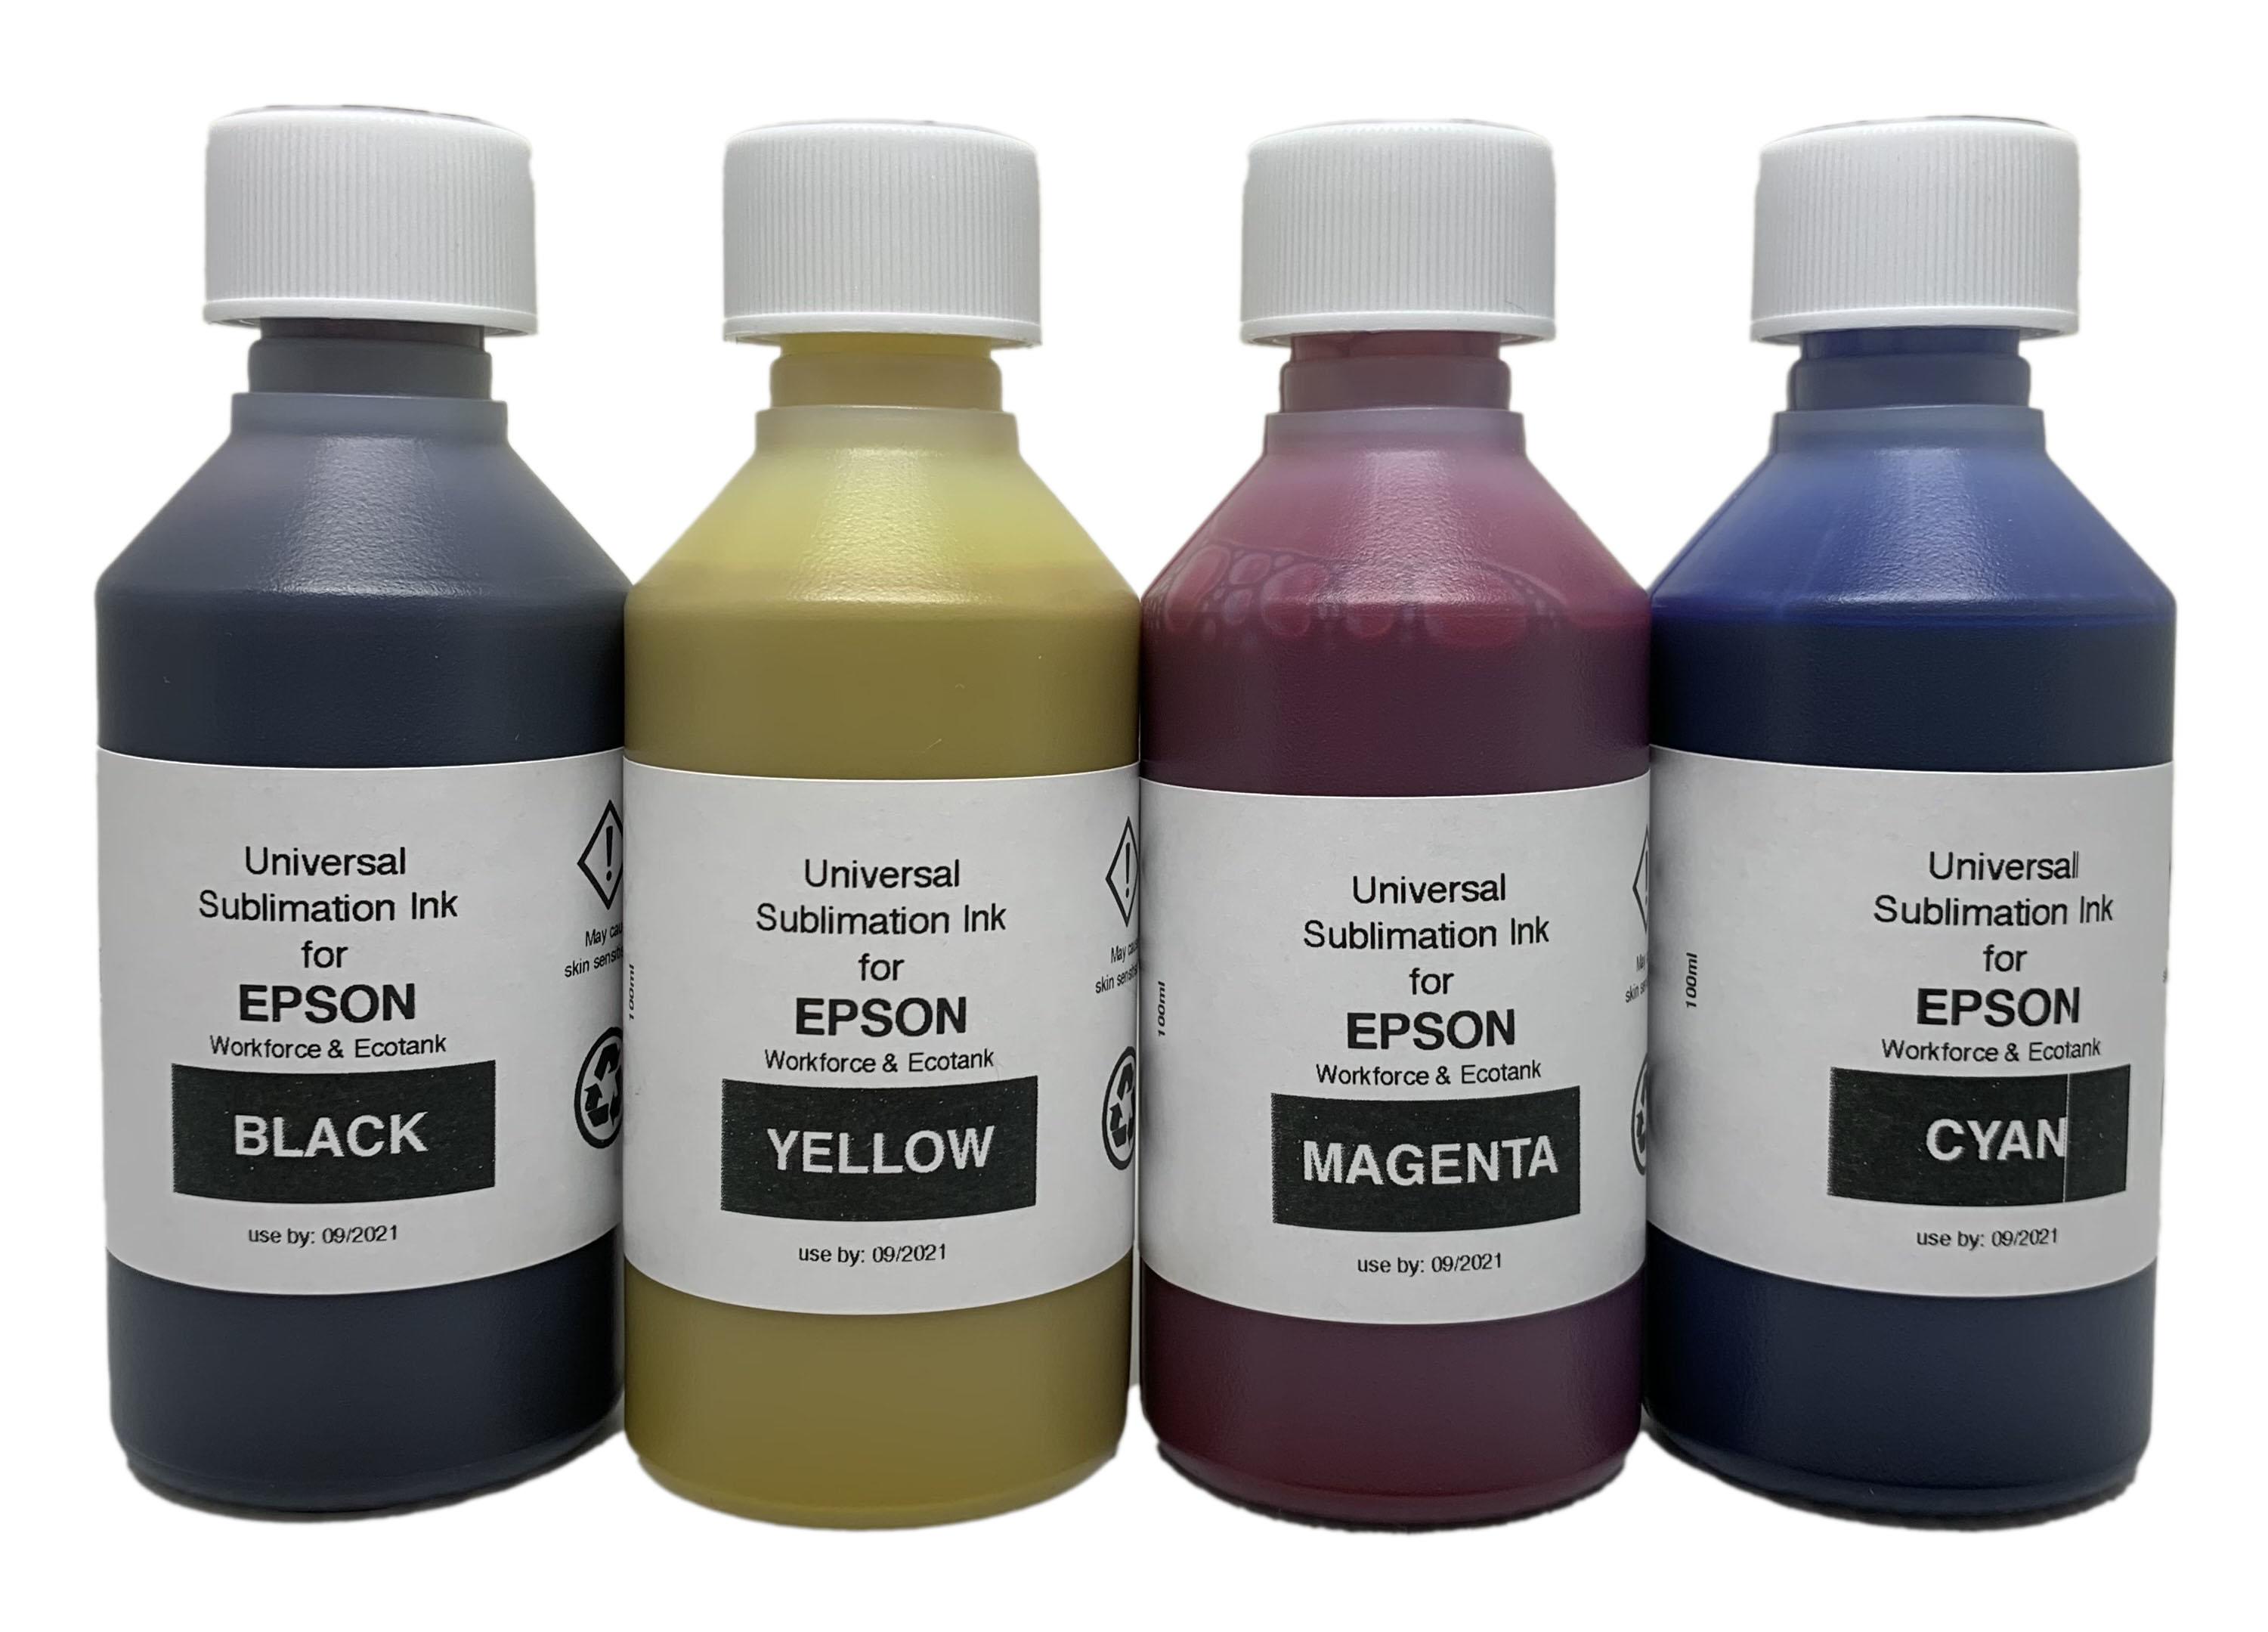 enore SFE sublimation inks